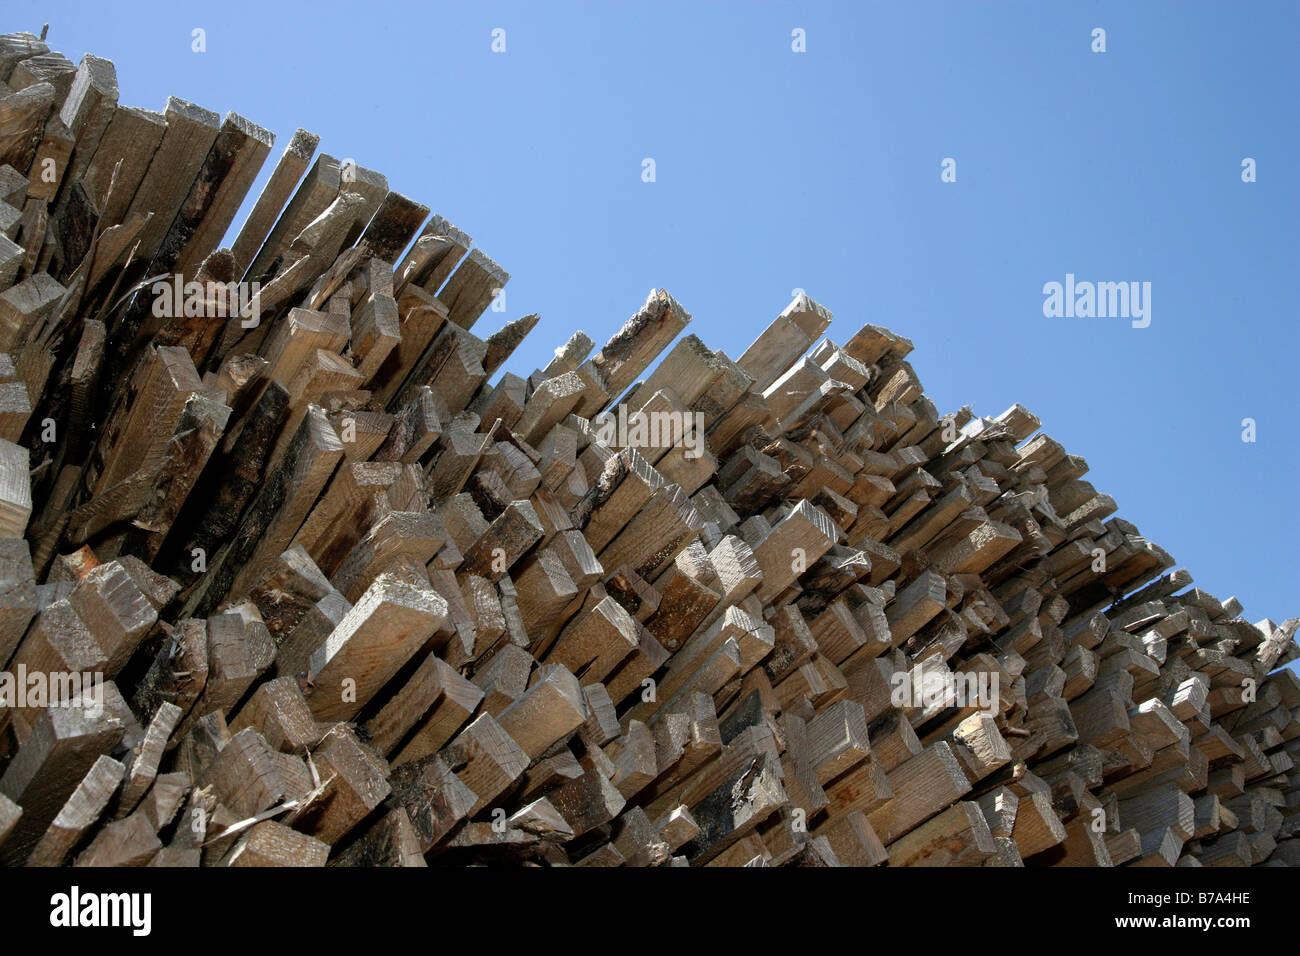 Wood stored ready for the production of particle board or chipboard, at Pfleiderer AG's production facility in Neumarkt, Bavari Stock Photo